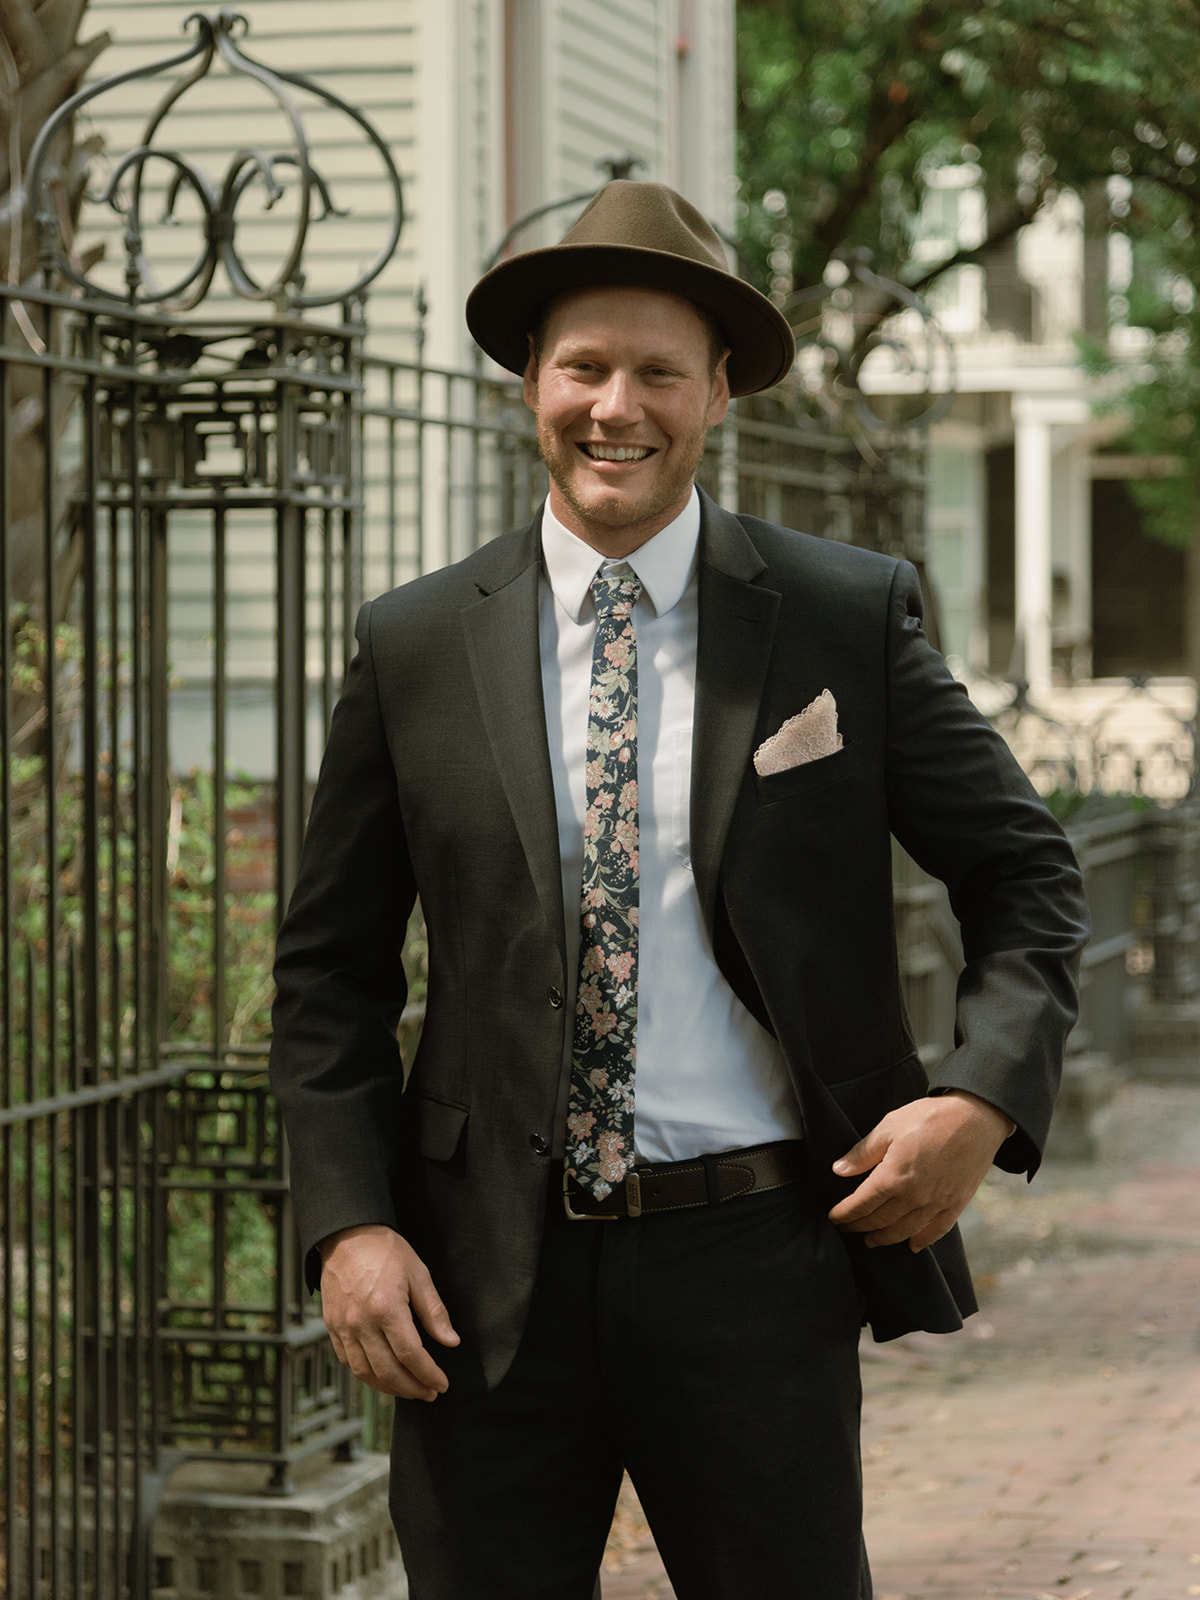 The groom wore a navy blue suit and fedora in a nod to classic Southern style for this elopement in Savannah, Georgia 